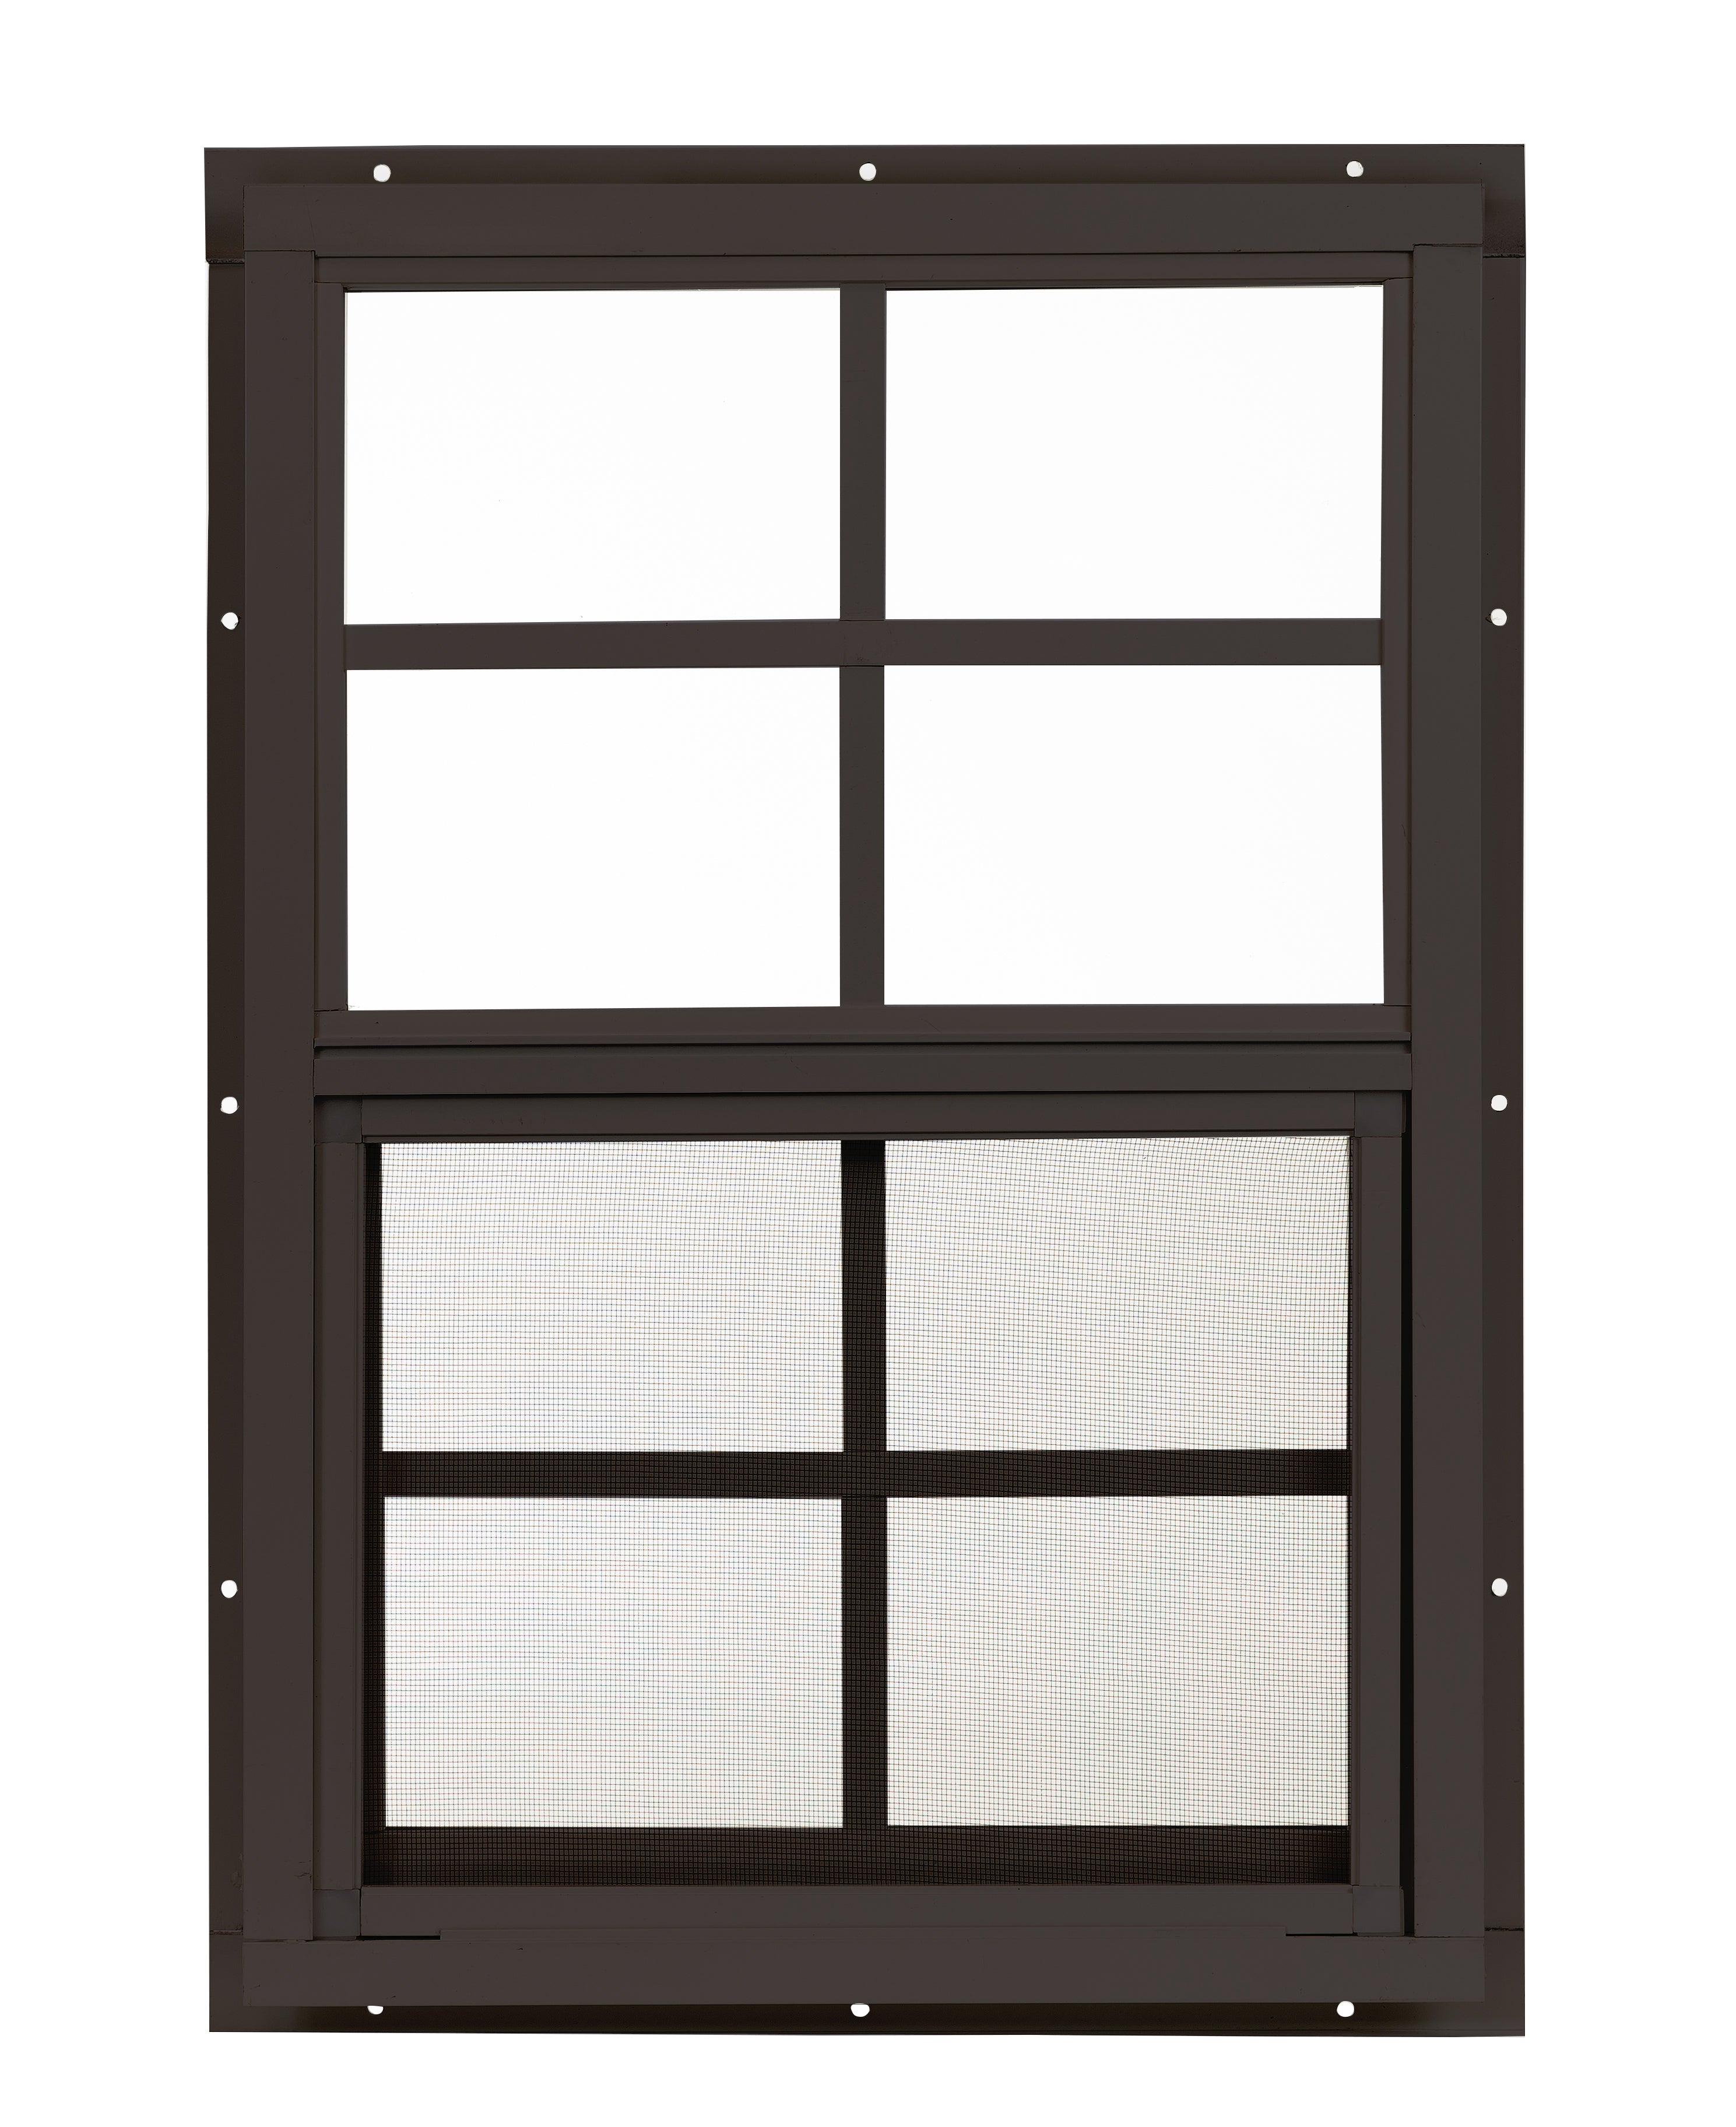 14" W x 21" H Single Hung Flush Mount Brown Window for Sheds, Playhouses, and MORE